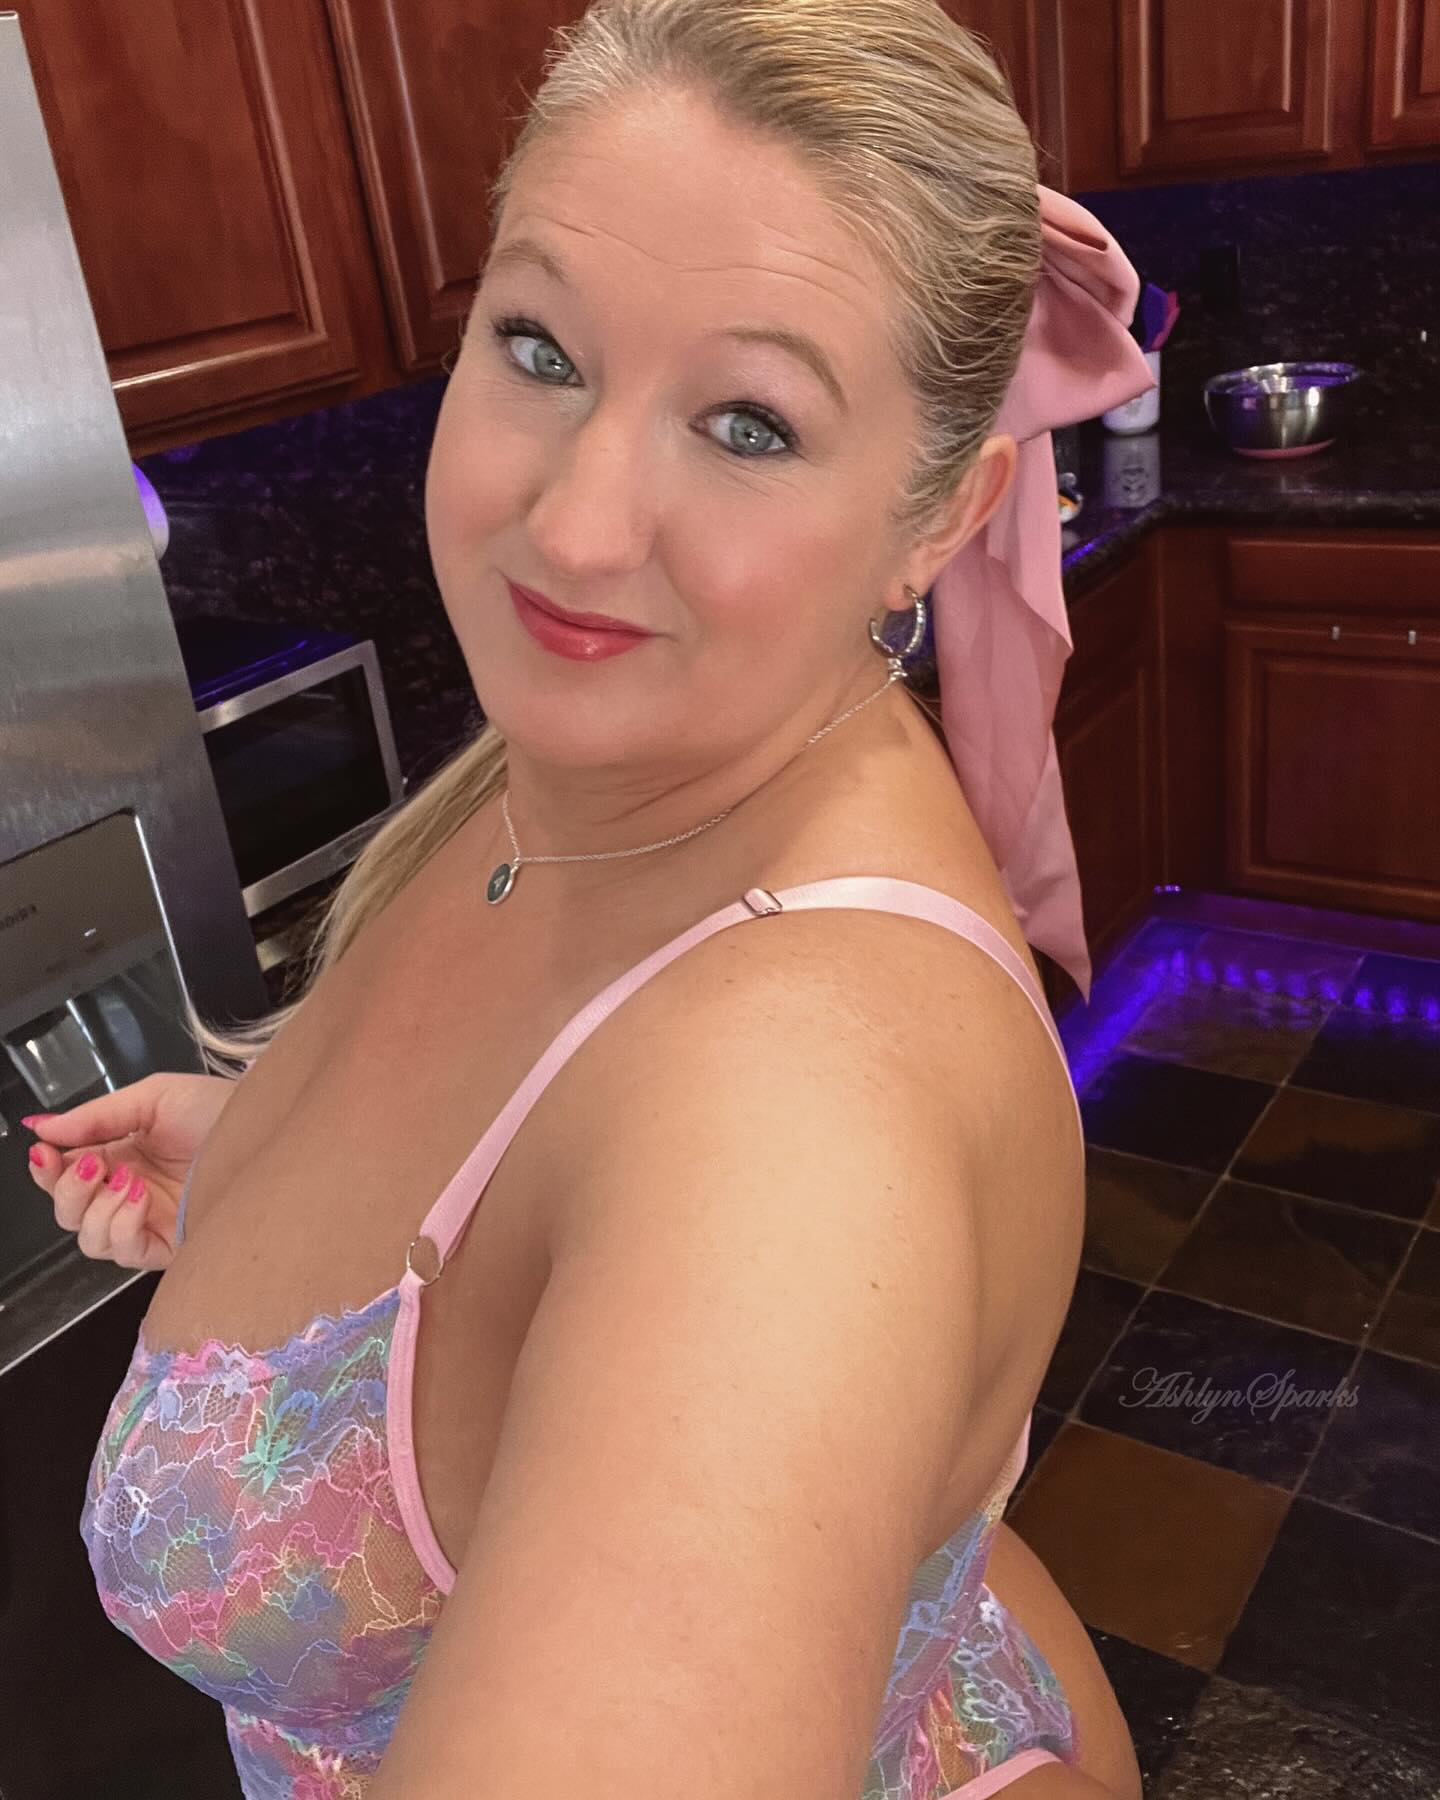 Getting ready to make some treats 🧁 
🍪 What would you like me to make for you❔